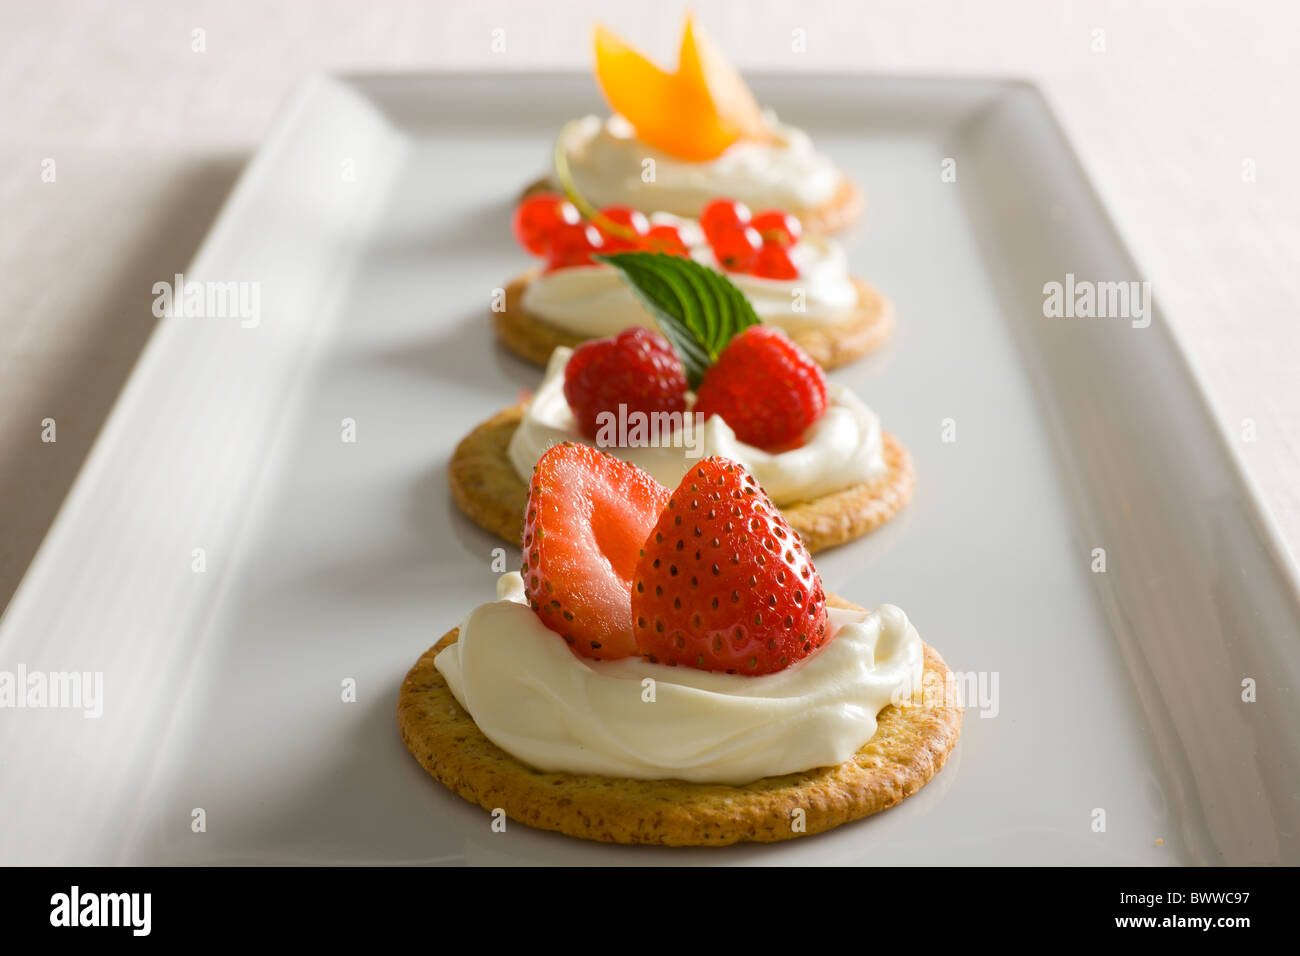 Crackers with Creamy Cheese spread, garnished with Raspberries, Mint, Strawberries, Red Currant and Yellow Plums on top on a whi Stock Photo